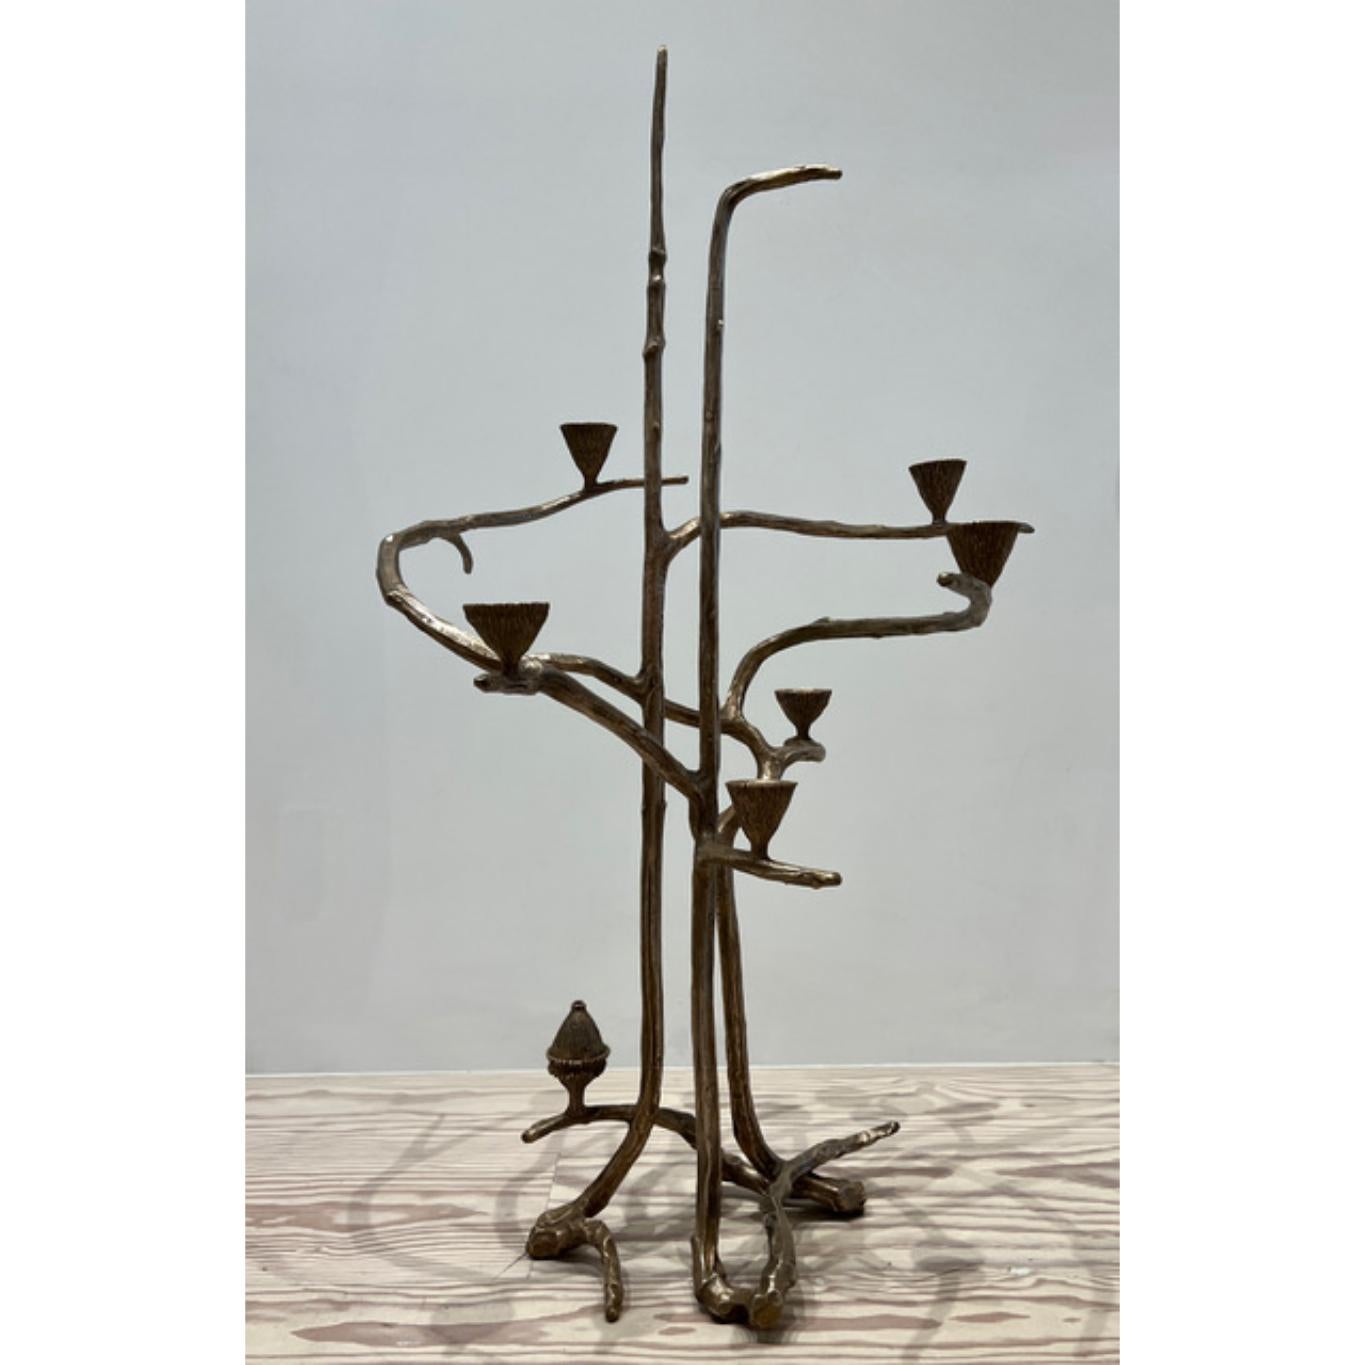 Bronze candelabra by Mary Brogger
One of a kind
Dimensions: W 71 cm x D 53 cm x H 109 cm
Materials: Bronze Includes sensor.

Mary Brogger is an internationally recognized artist whose diverse practice includes sculpture and site-responsive